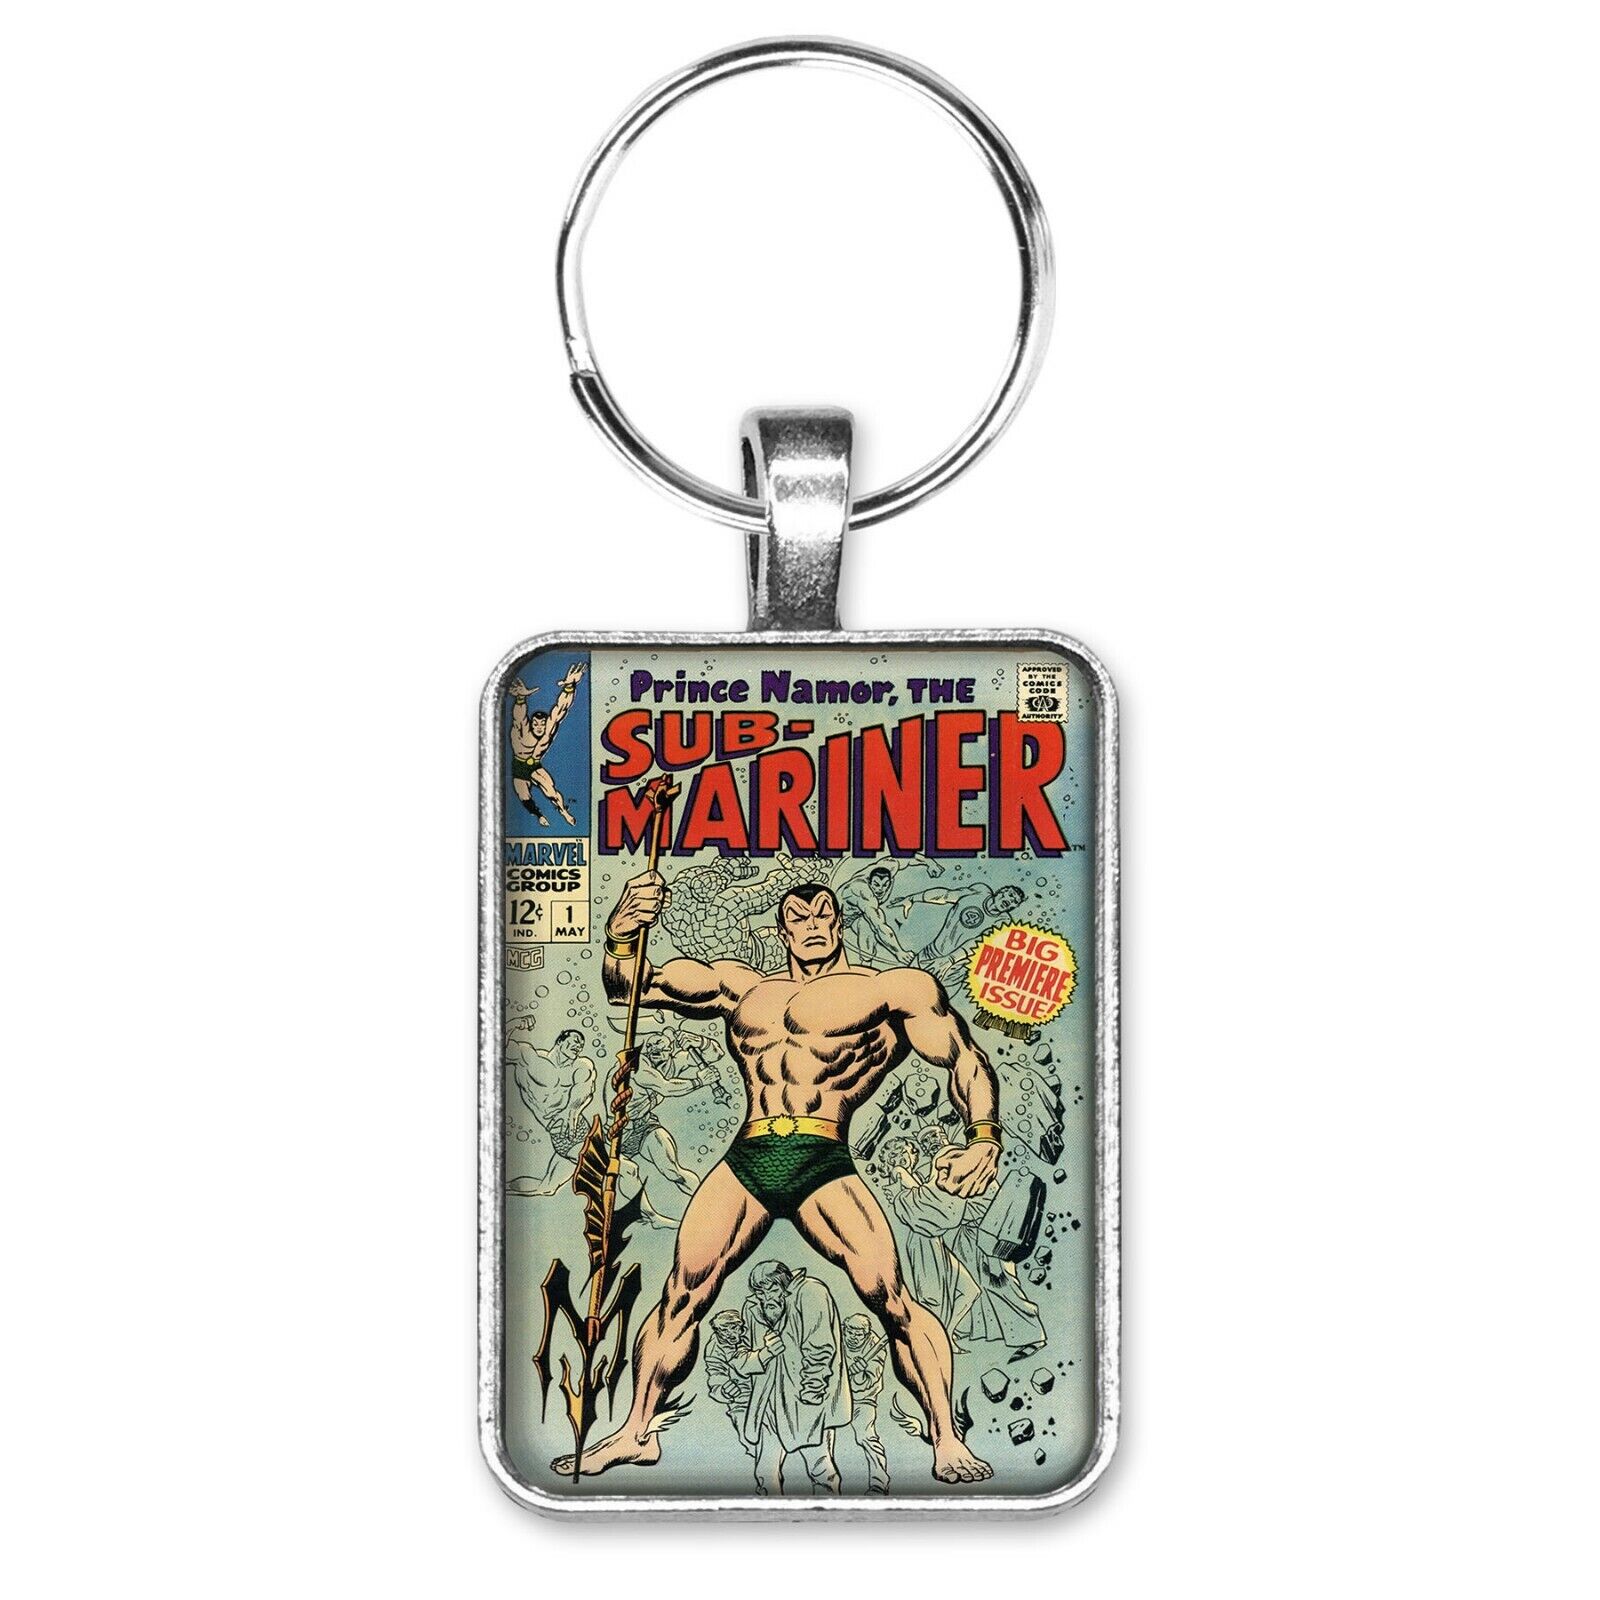 Prince Namor The Sub-Mariner #1 Cover Key Ring or Necklace Classic Comic Book